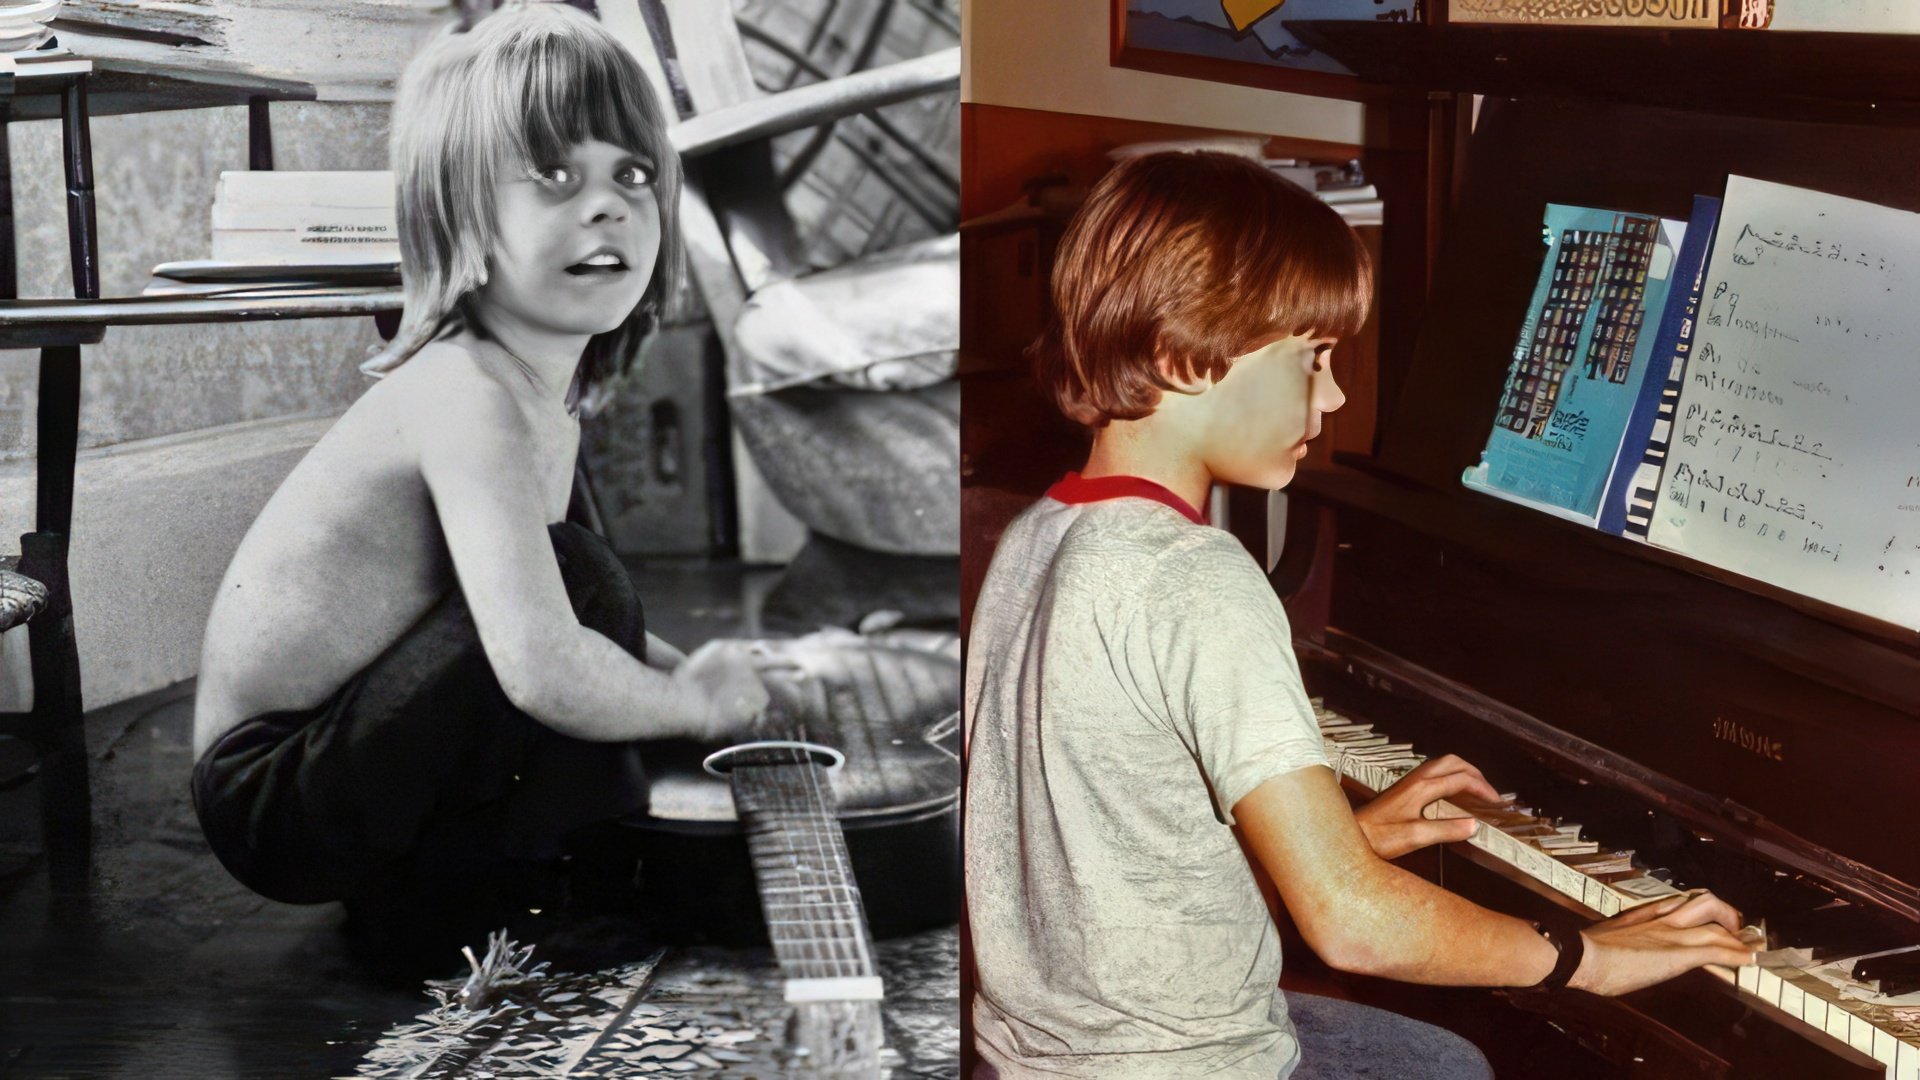 Jared Leto has been inseparable from music since childhood